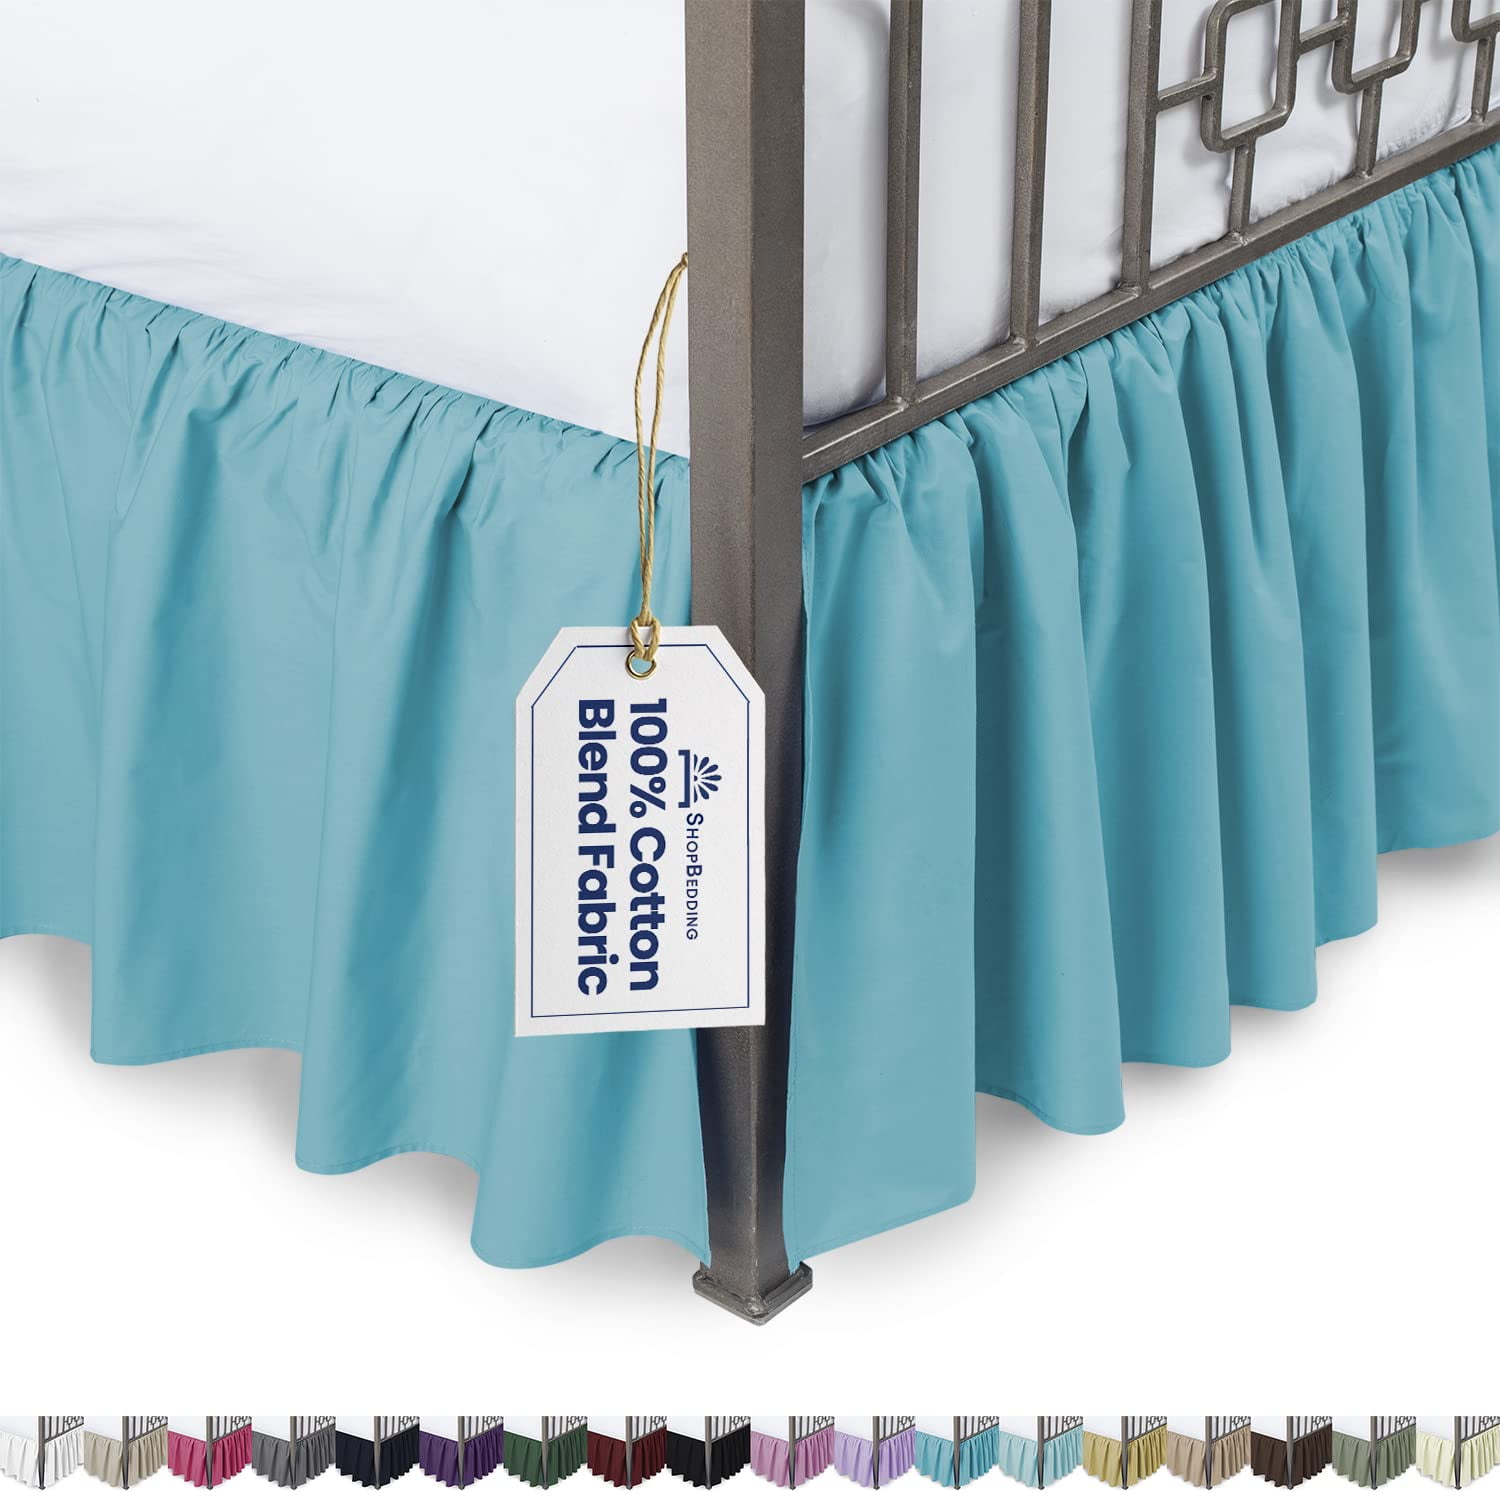 NAVY BLUE Solid SPLIT Corner Ruffle Bed Skirt 650-TC Cotton US Bed Size/Drop New 